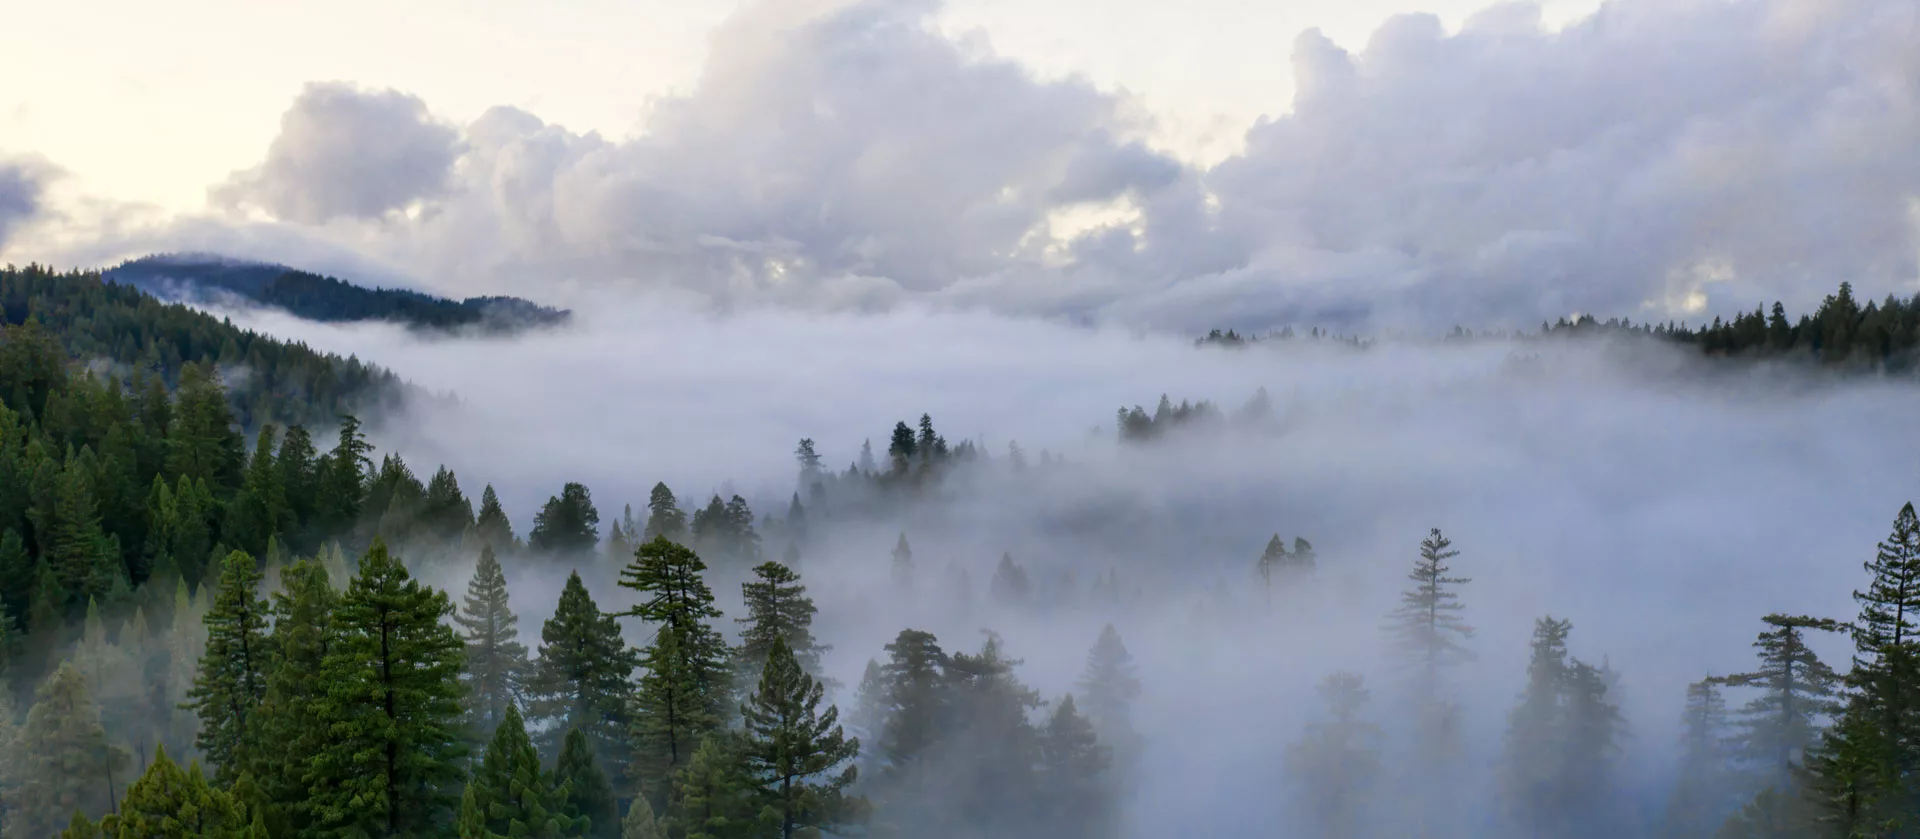 Aerial view of fog encompassing a section of redwoods